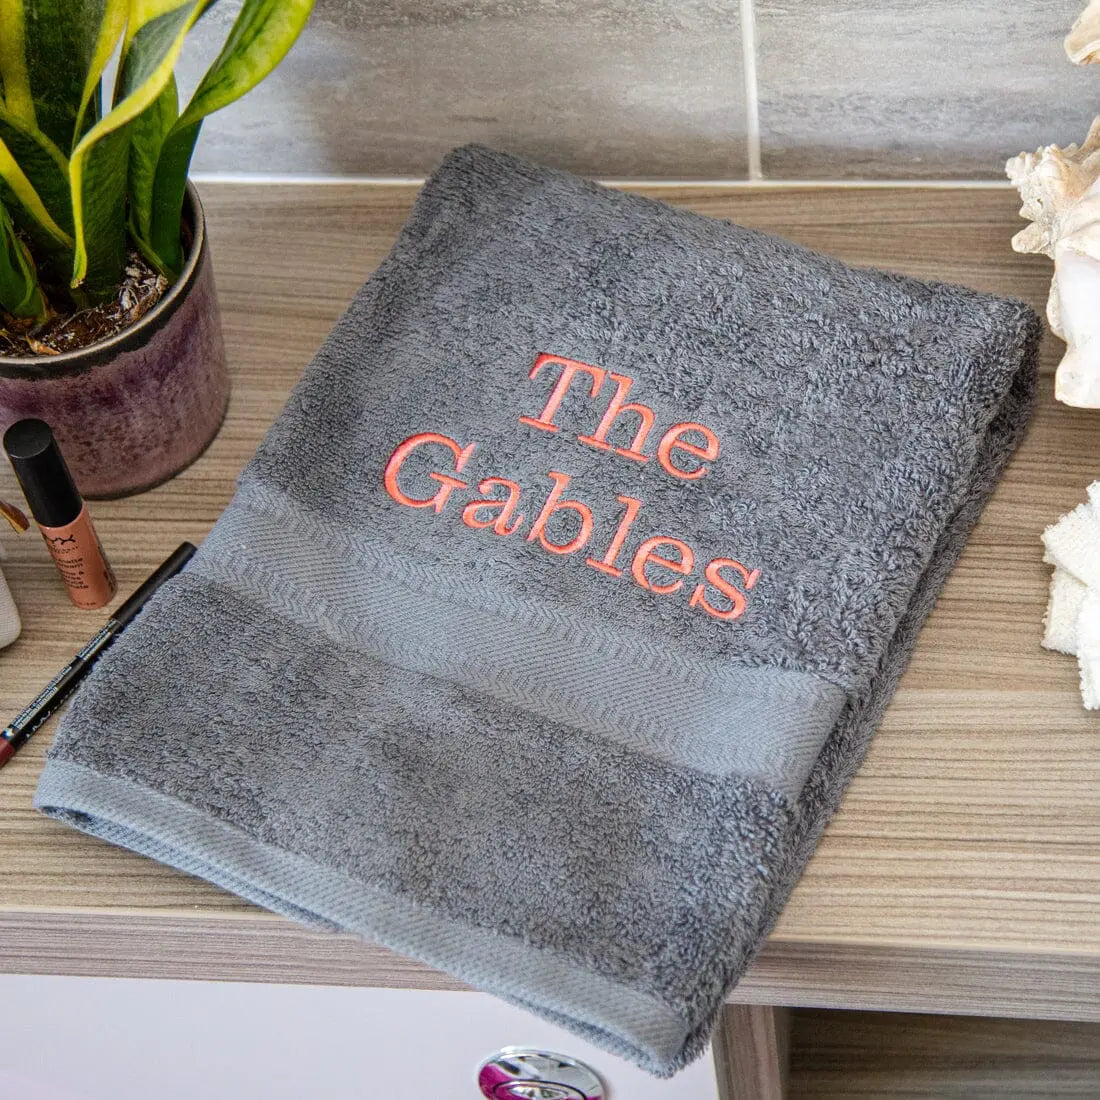 slate grey hand towel with the gables embroidered onto it